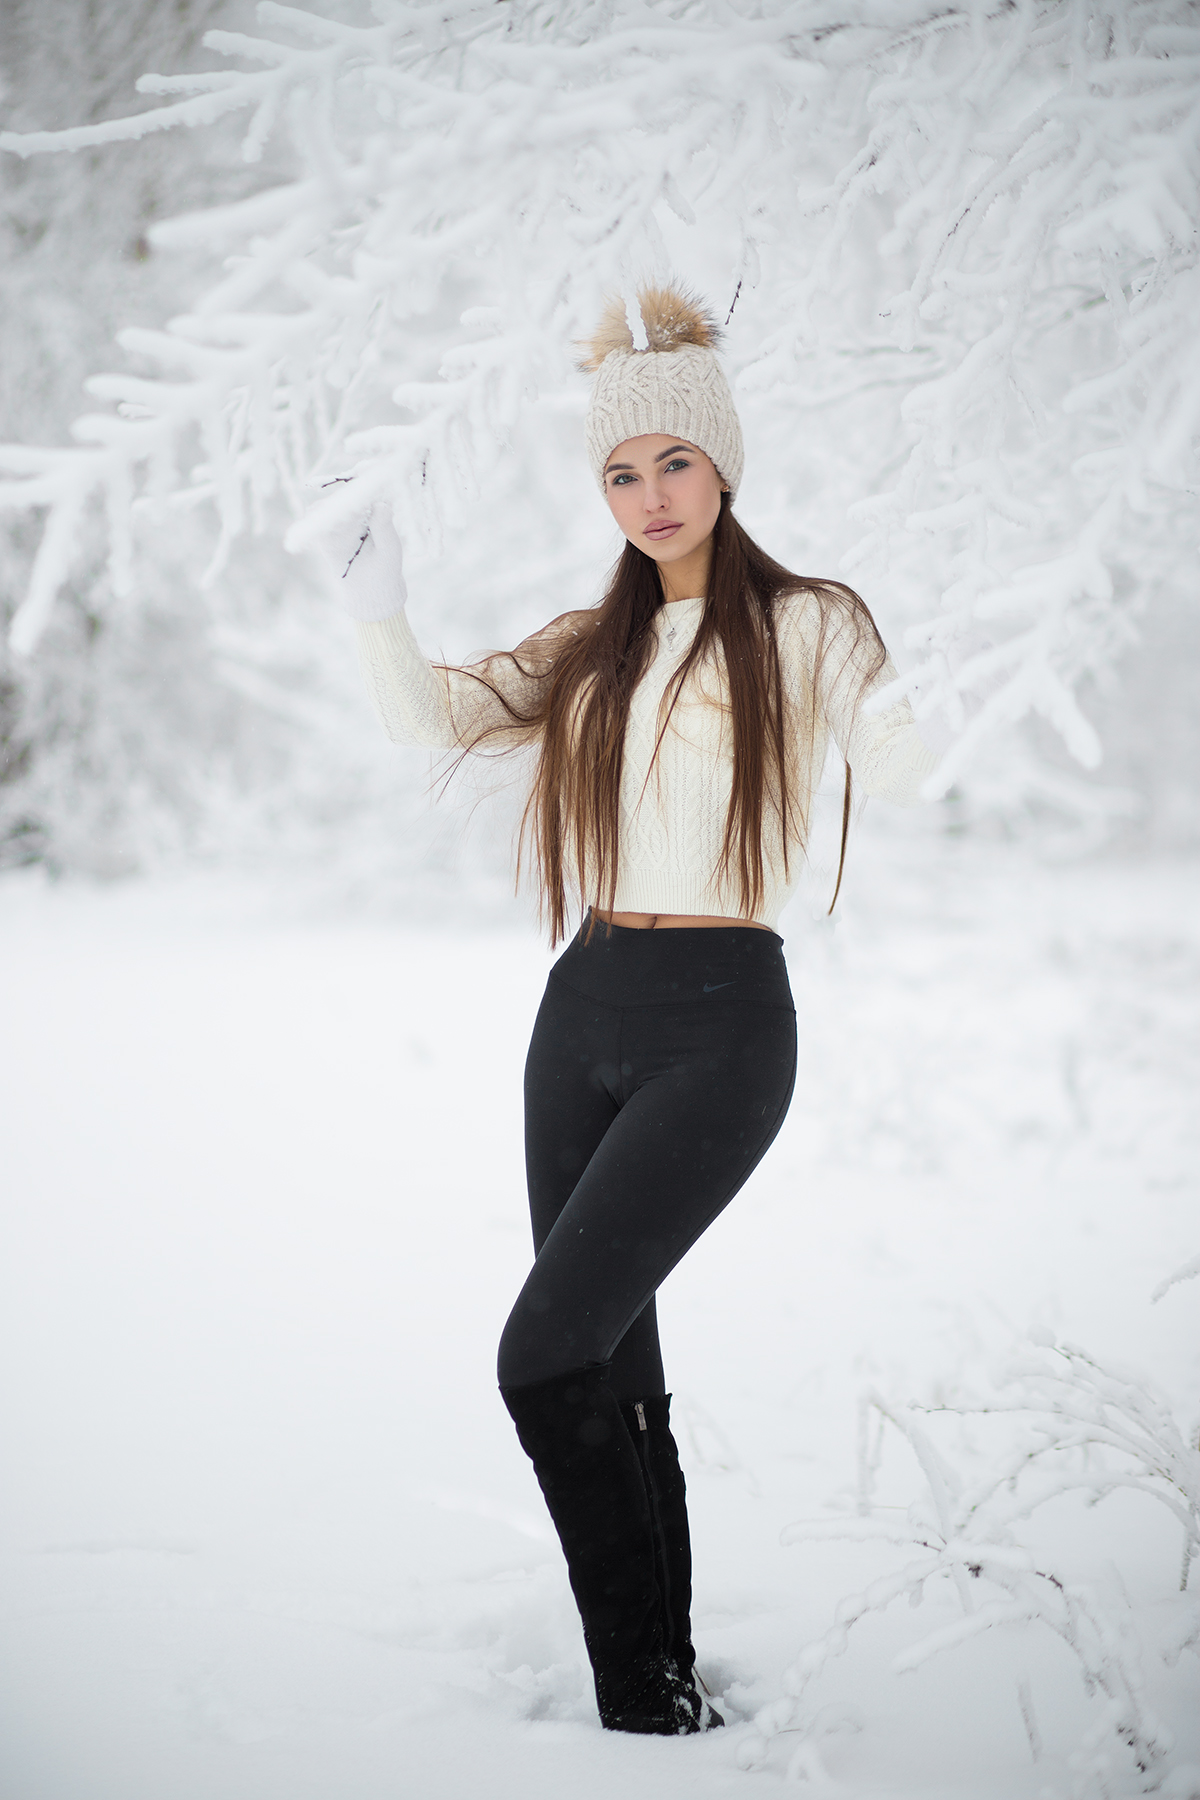 Portrait Display White Brunette Women Outdoors Snow Winter Pants Looking At Viewer Long Hair White S 1200x1800